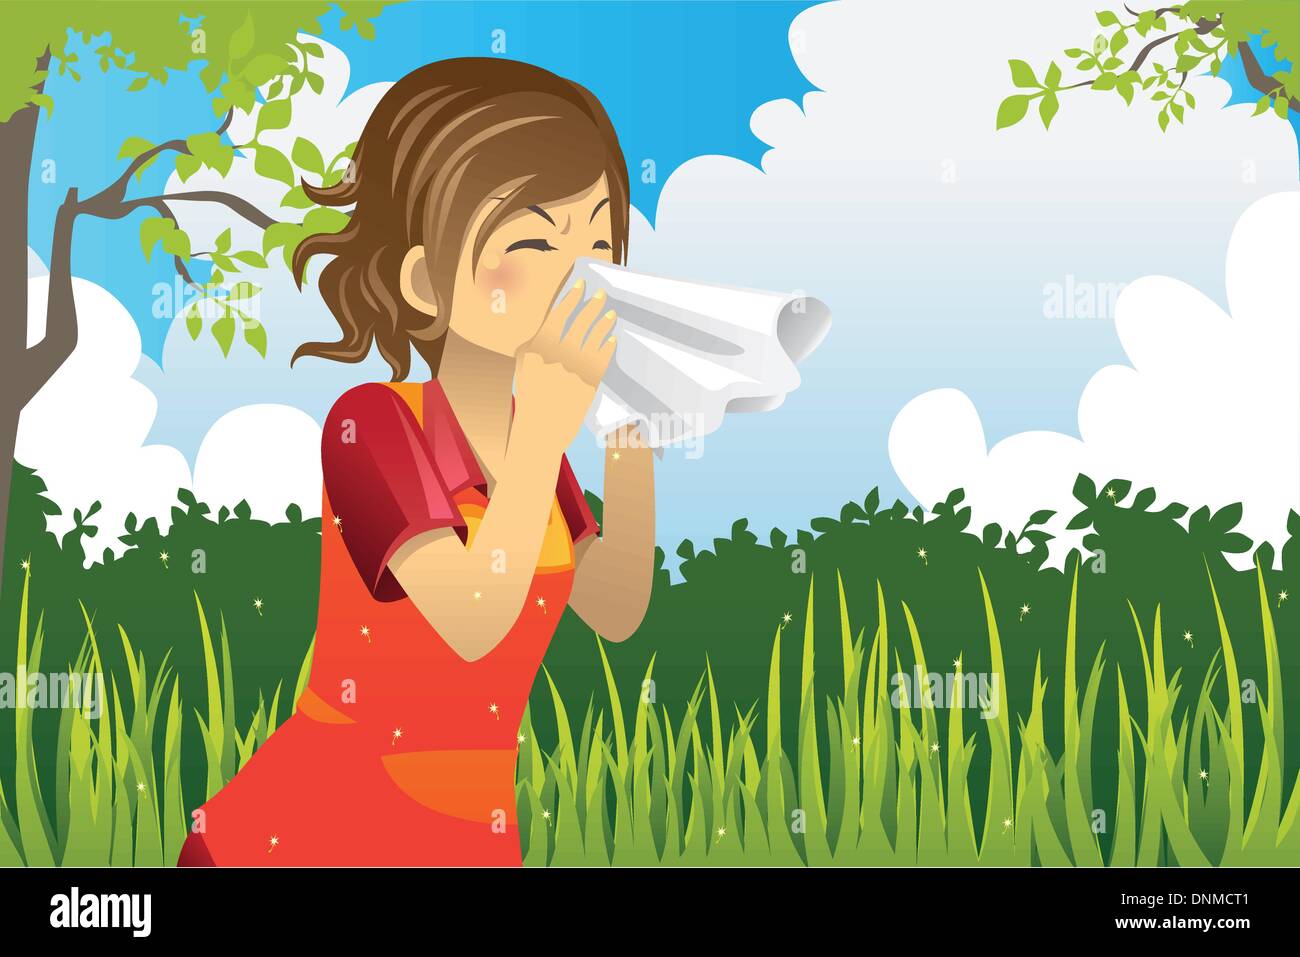 A vector illustration of a woman sneezing outdoor Stock Vector